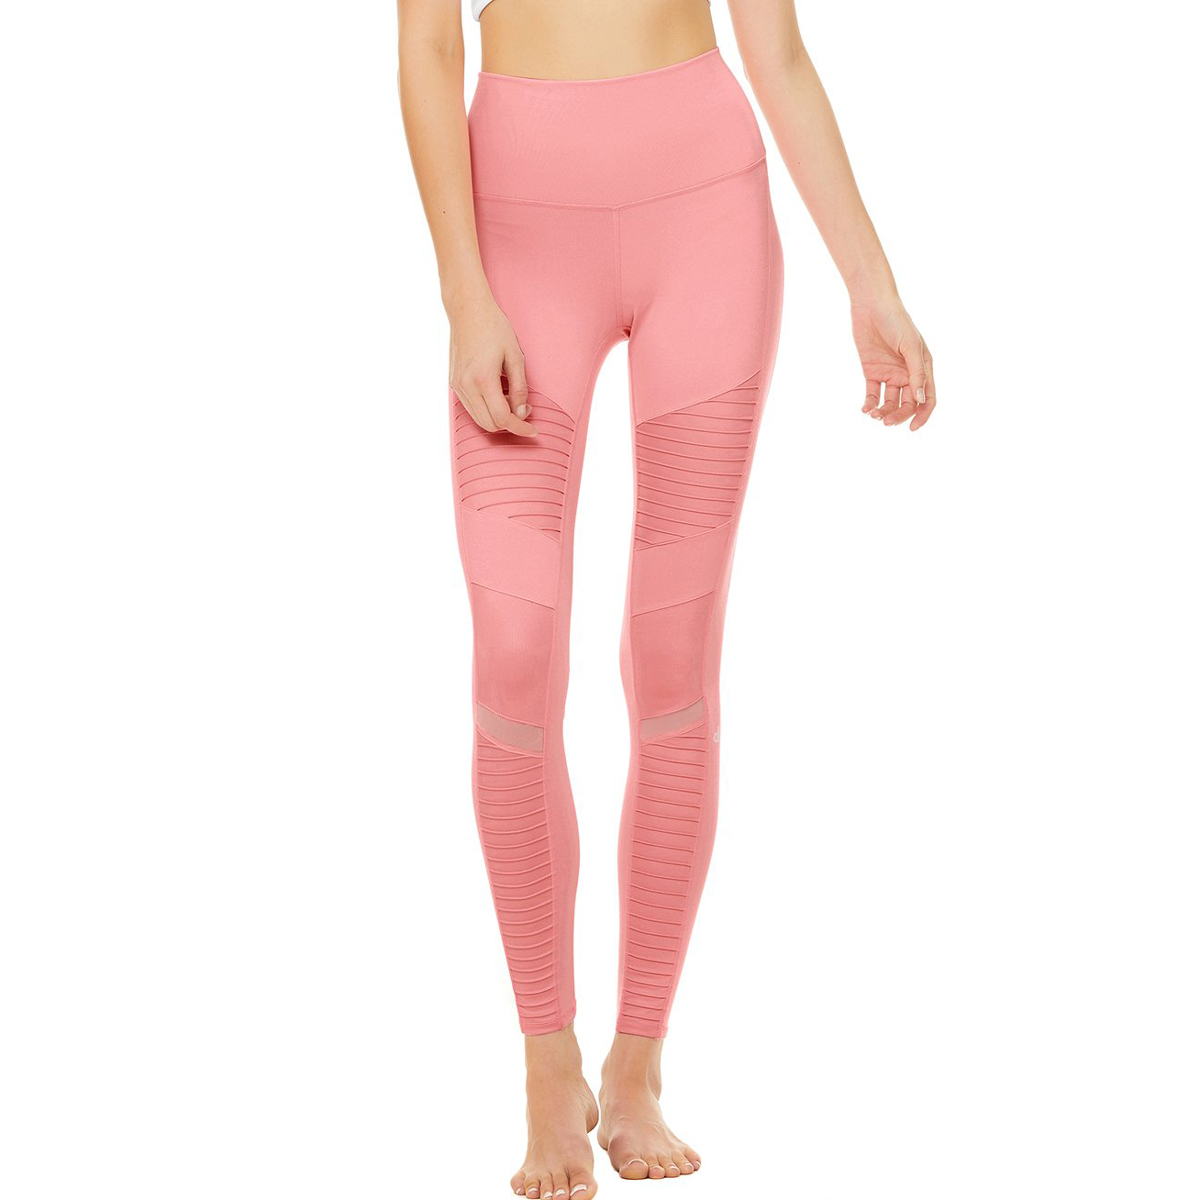 The 23 Most Comfortable Leggings, According to the Internet